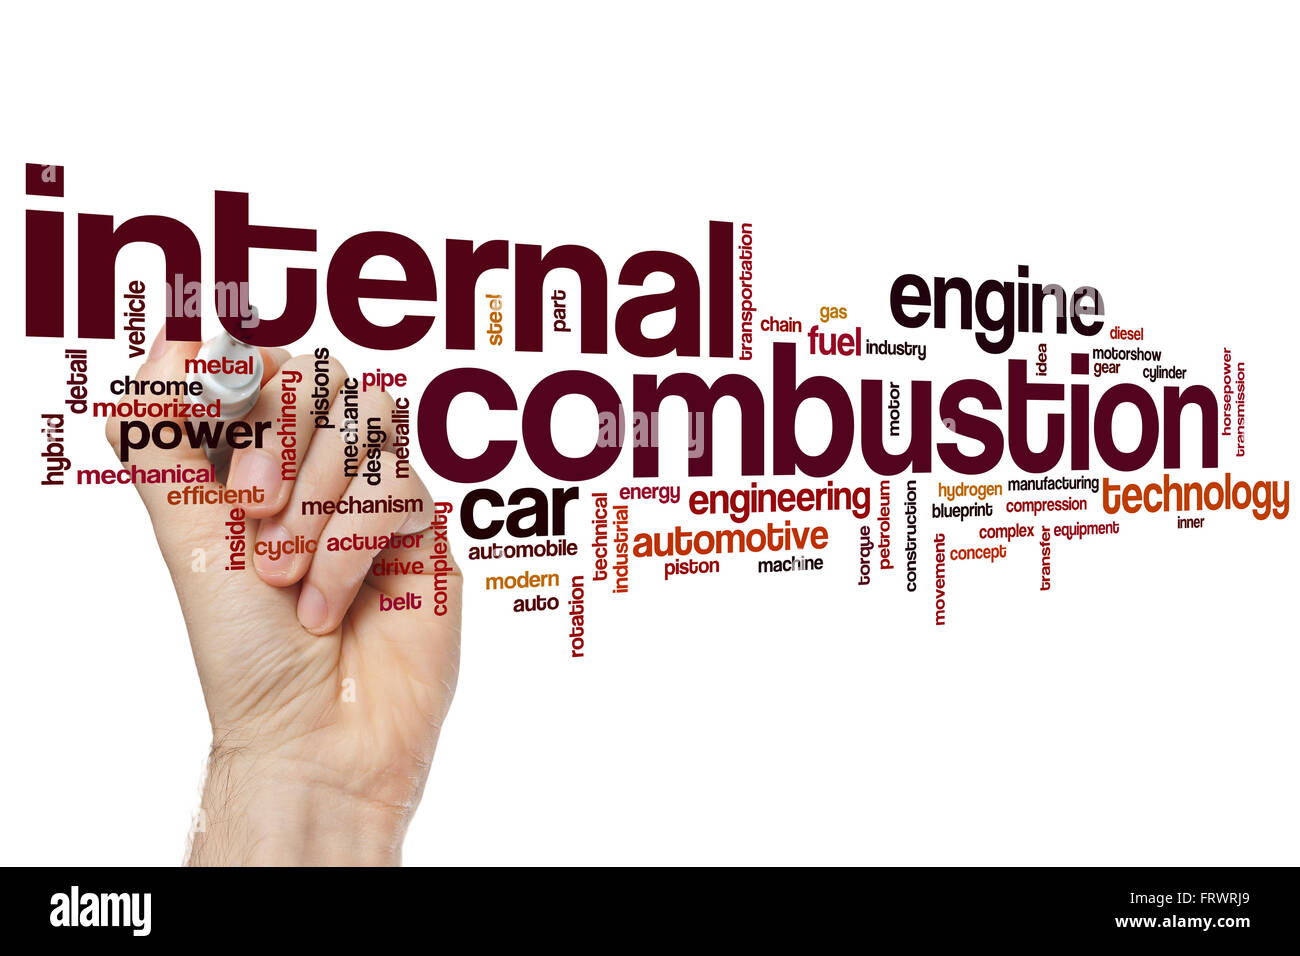 Internal combustion word cloud concept Stock Photo